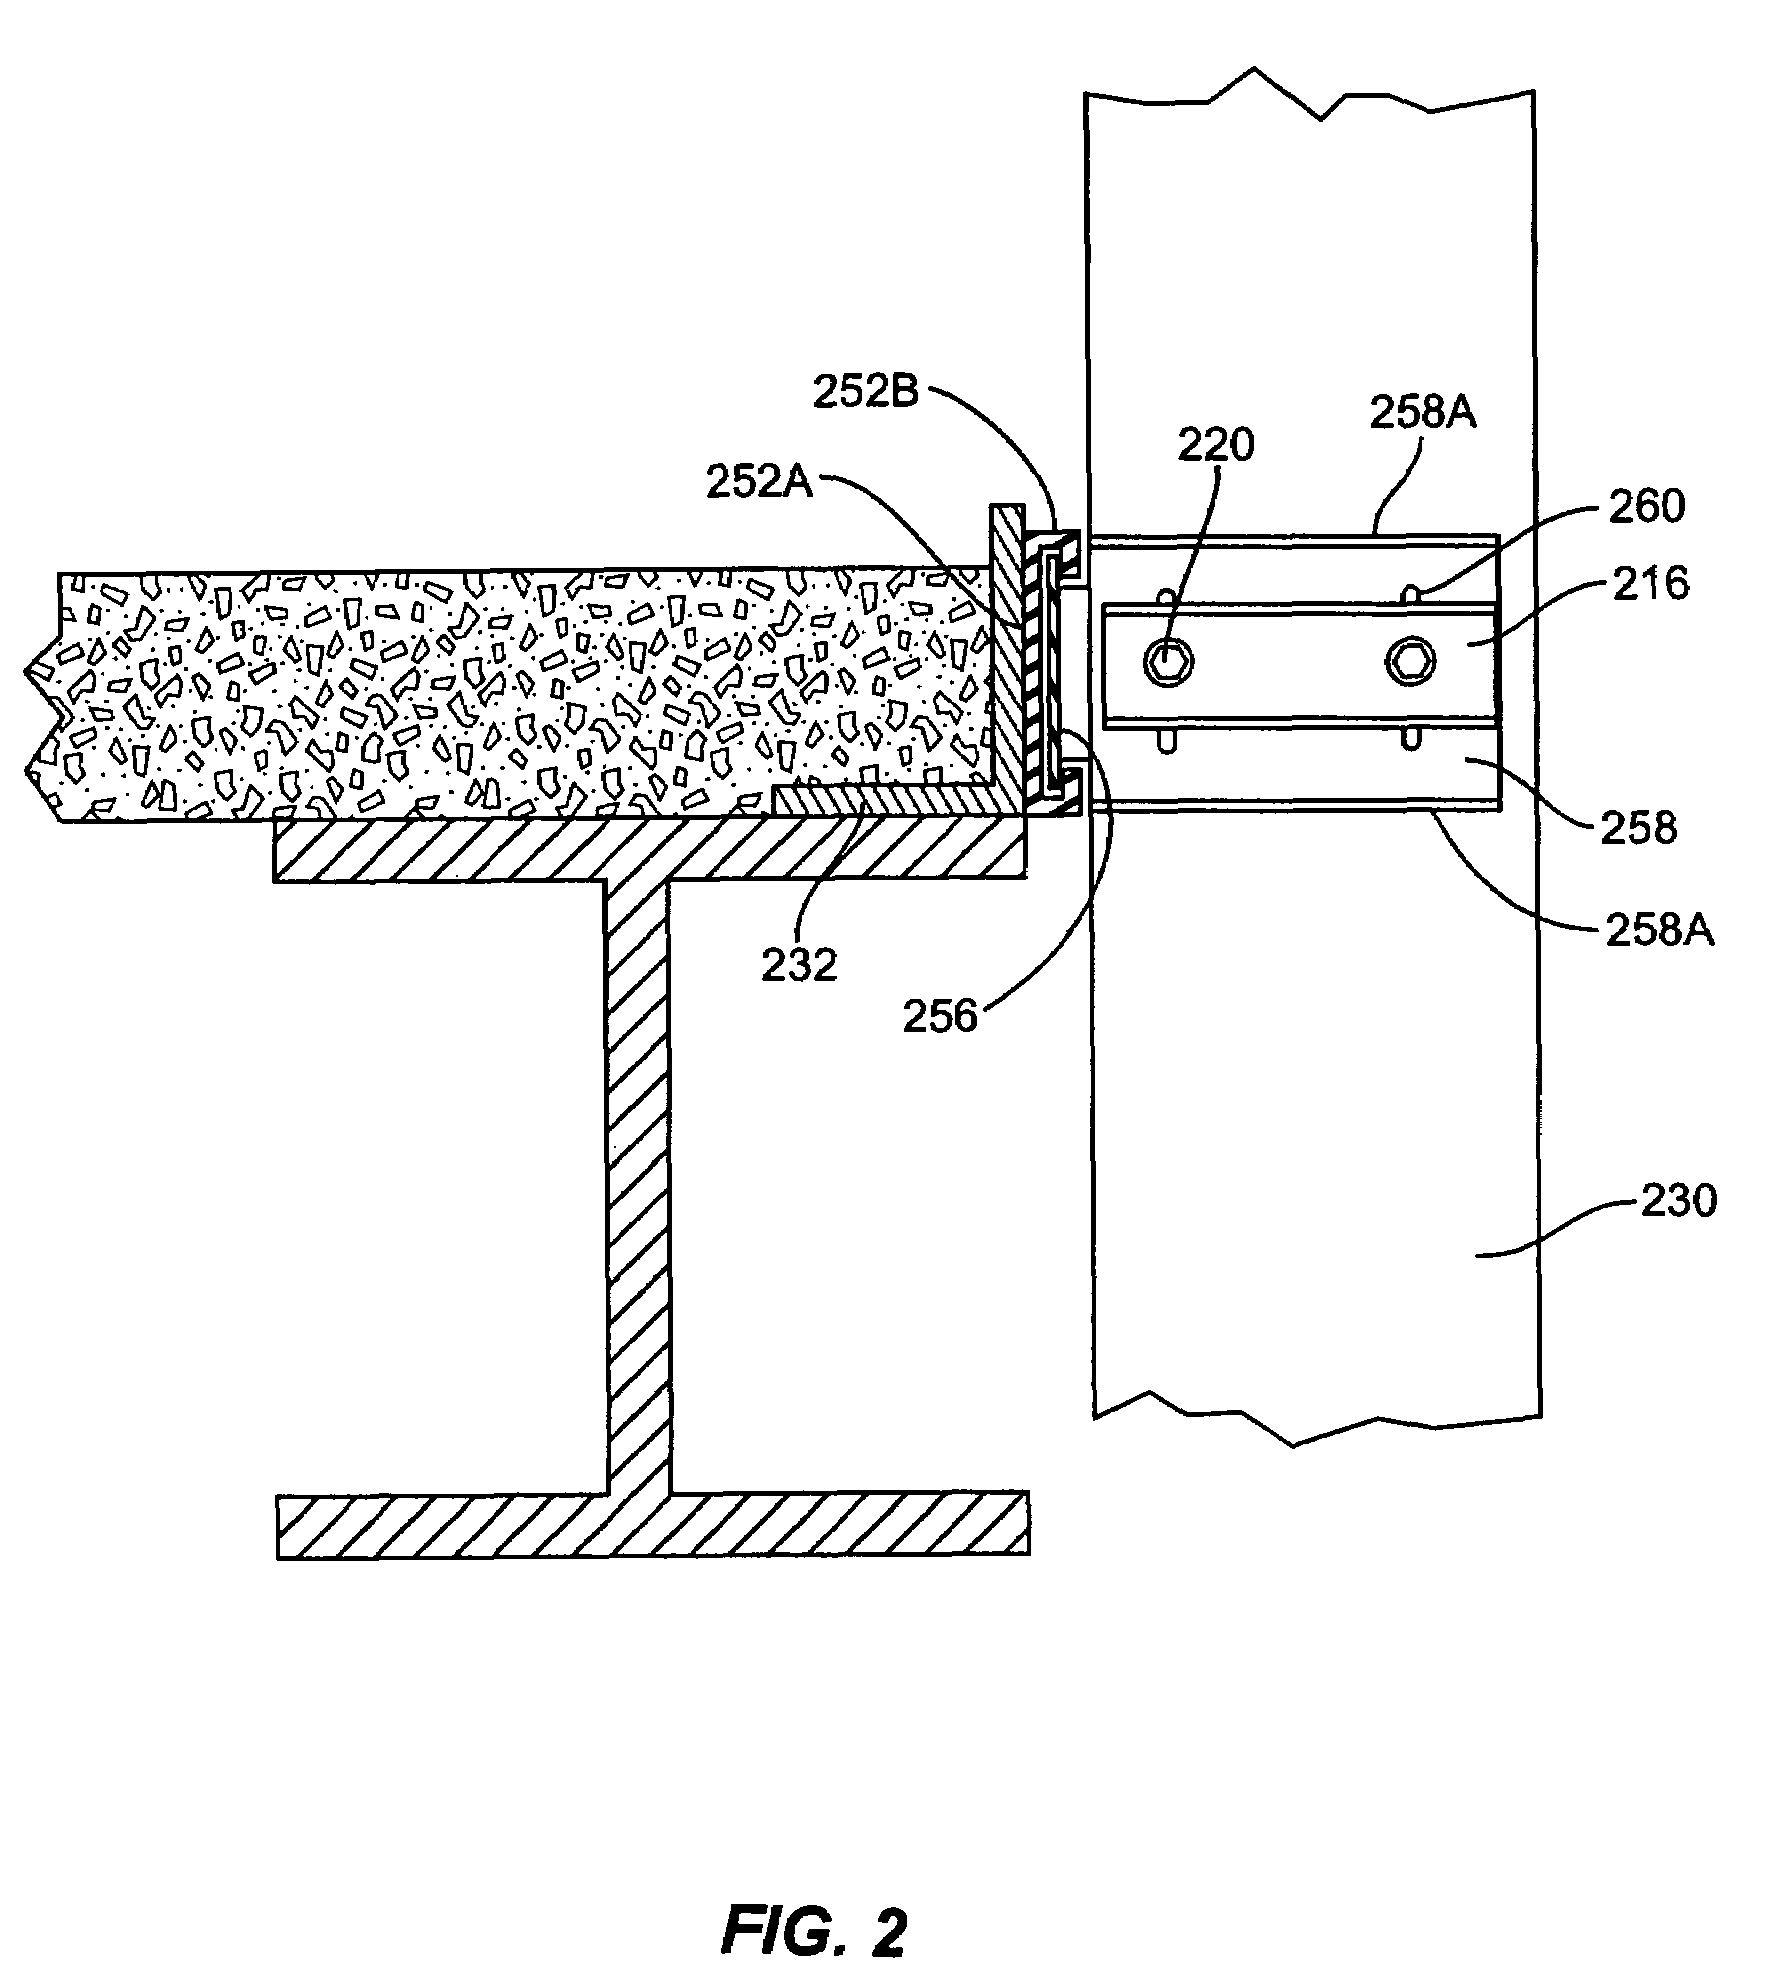 Connector assembly for allowing relative movement between two building members